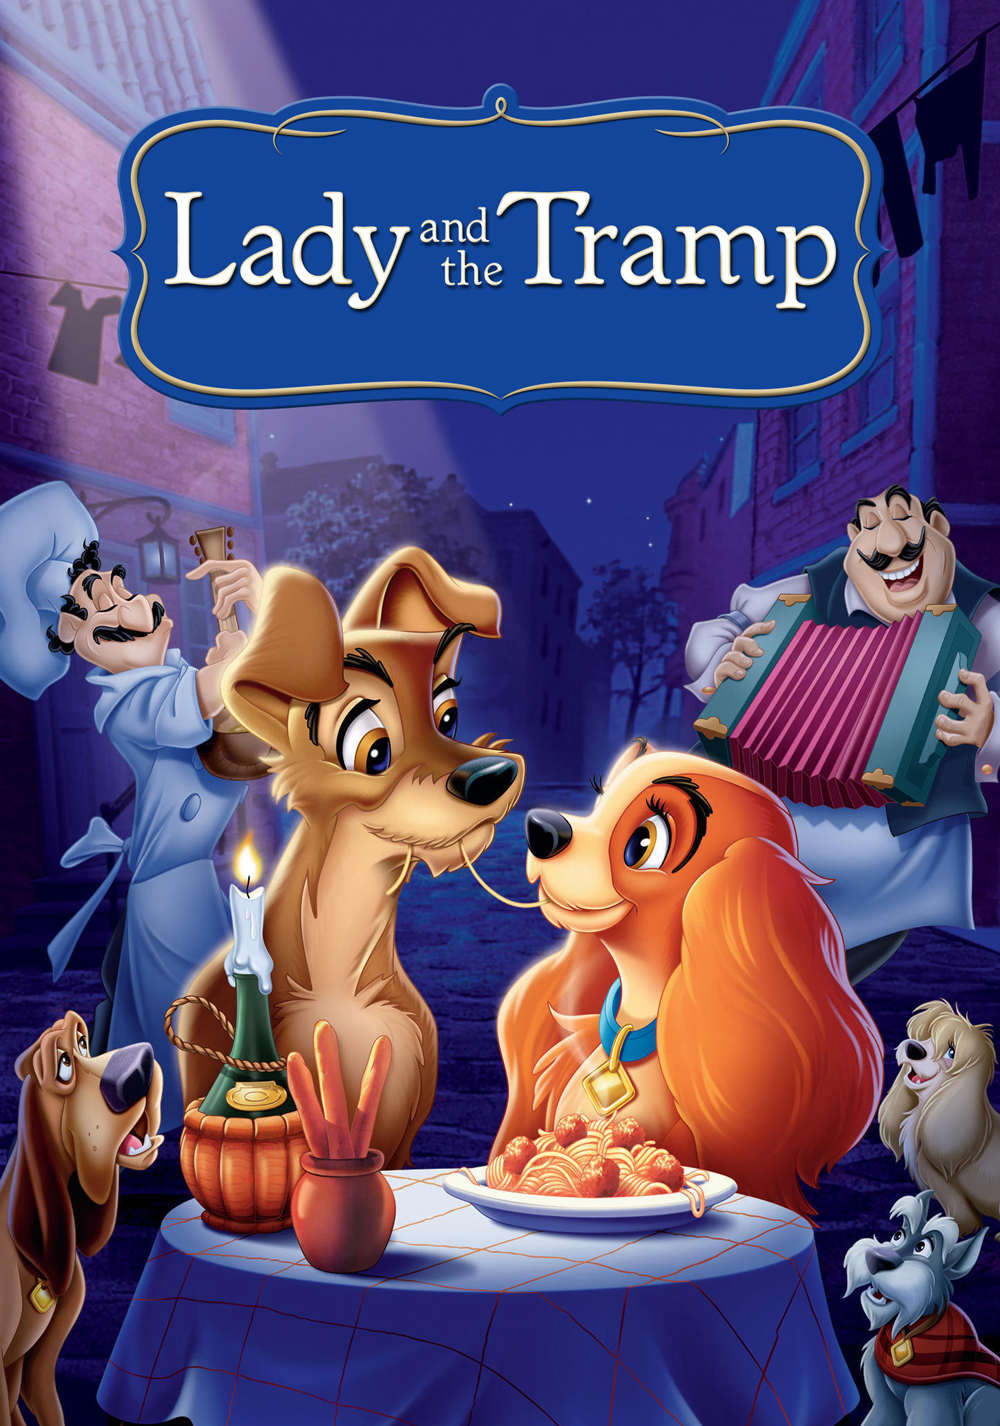 Lady and the Tramp - Food 'n Flix pick for February 2015